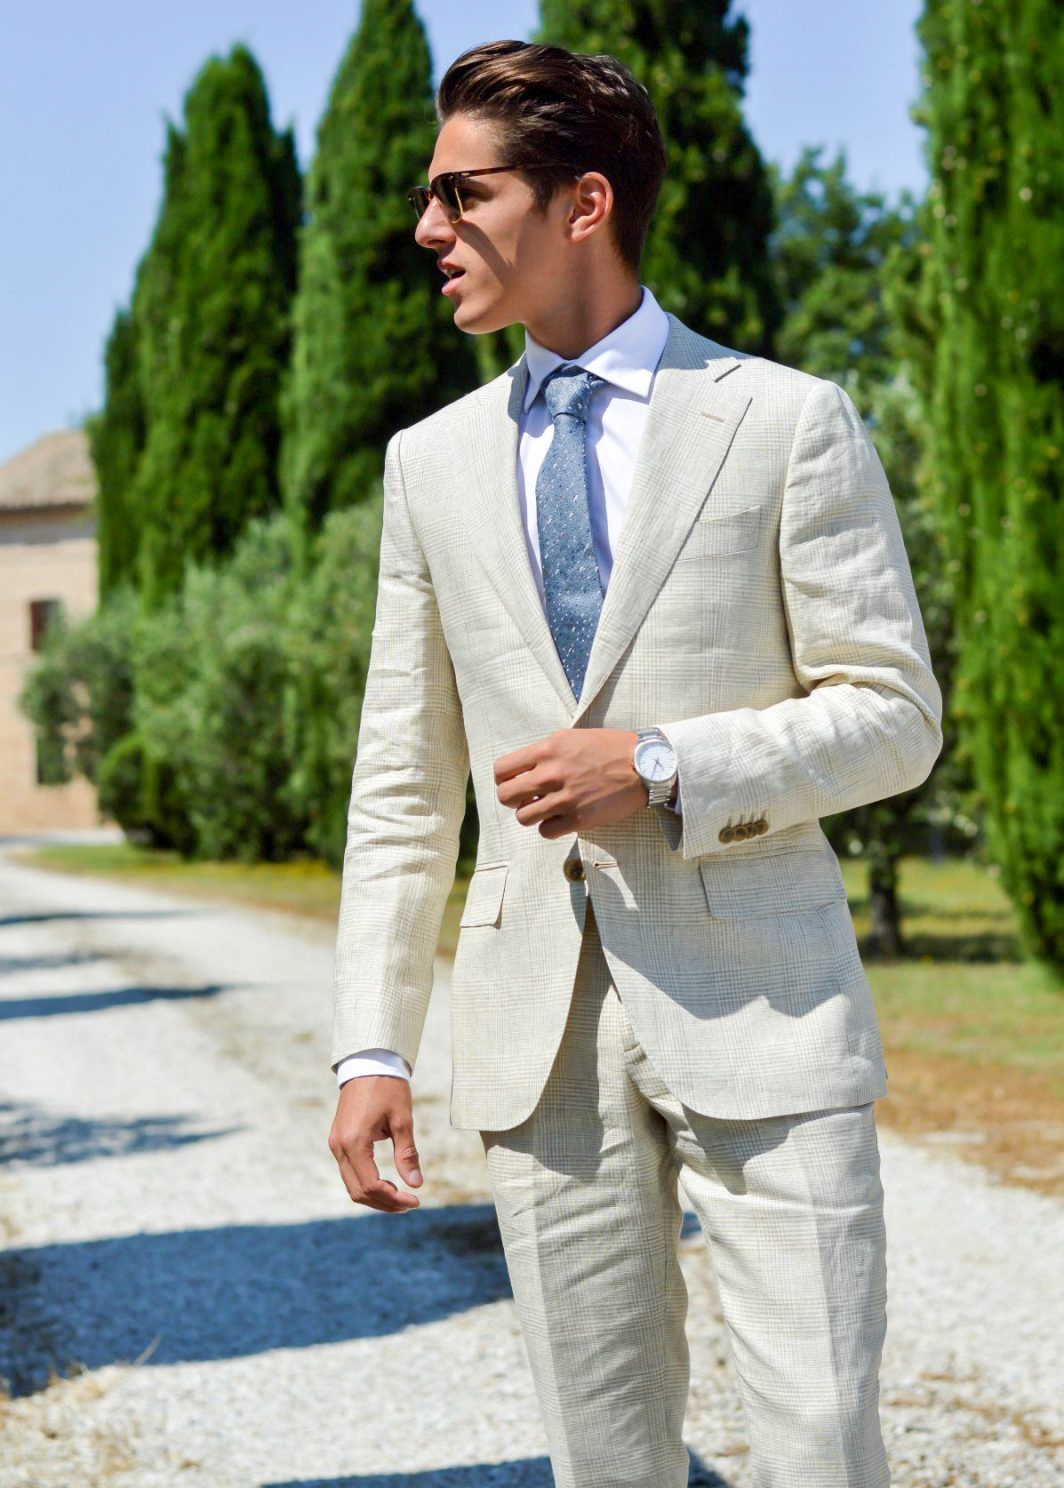 Blue and Tan Suit Combinations to Elevate Your Style: Try These Ideas ...